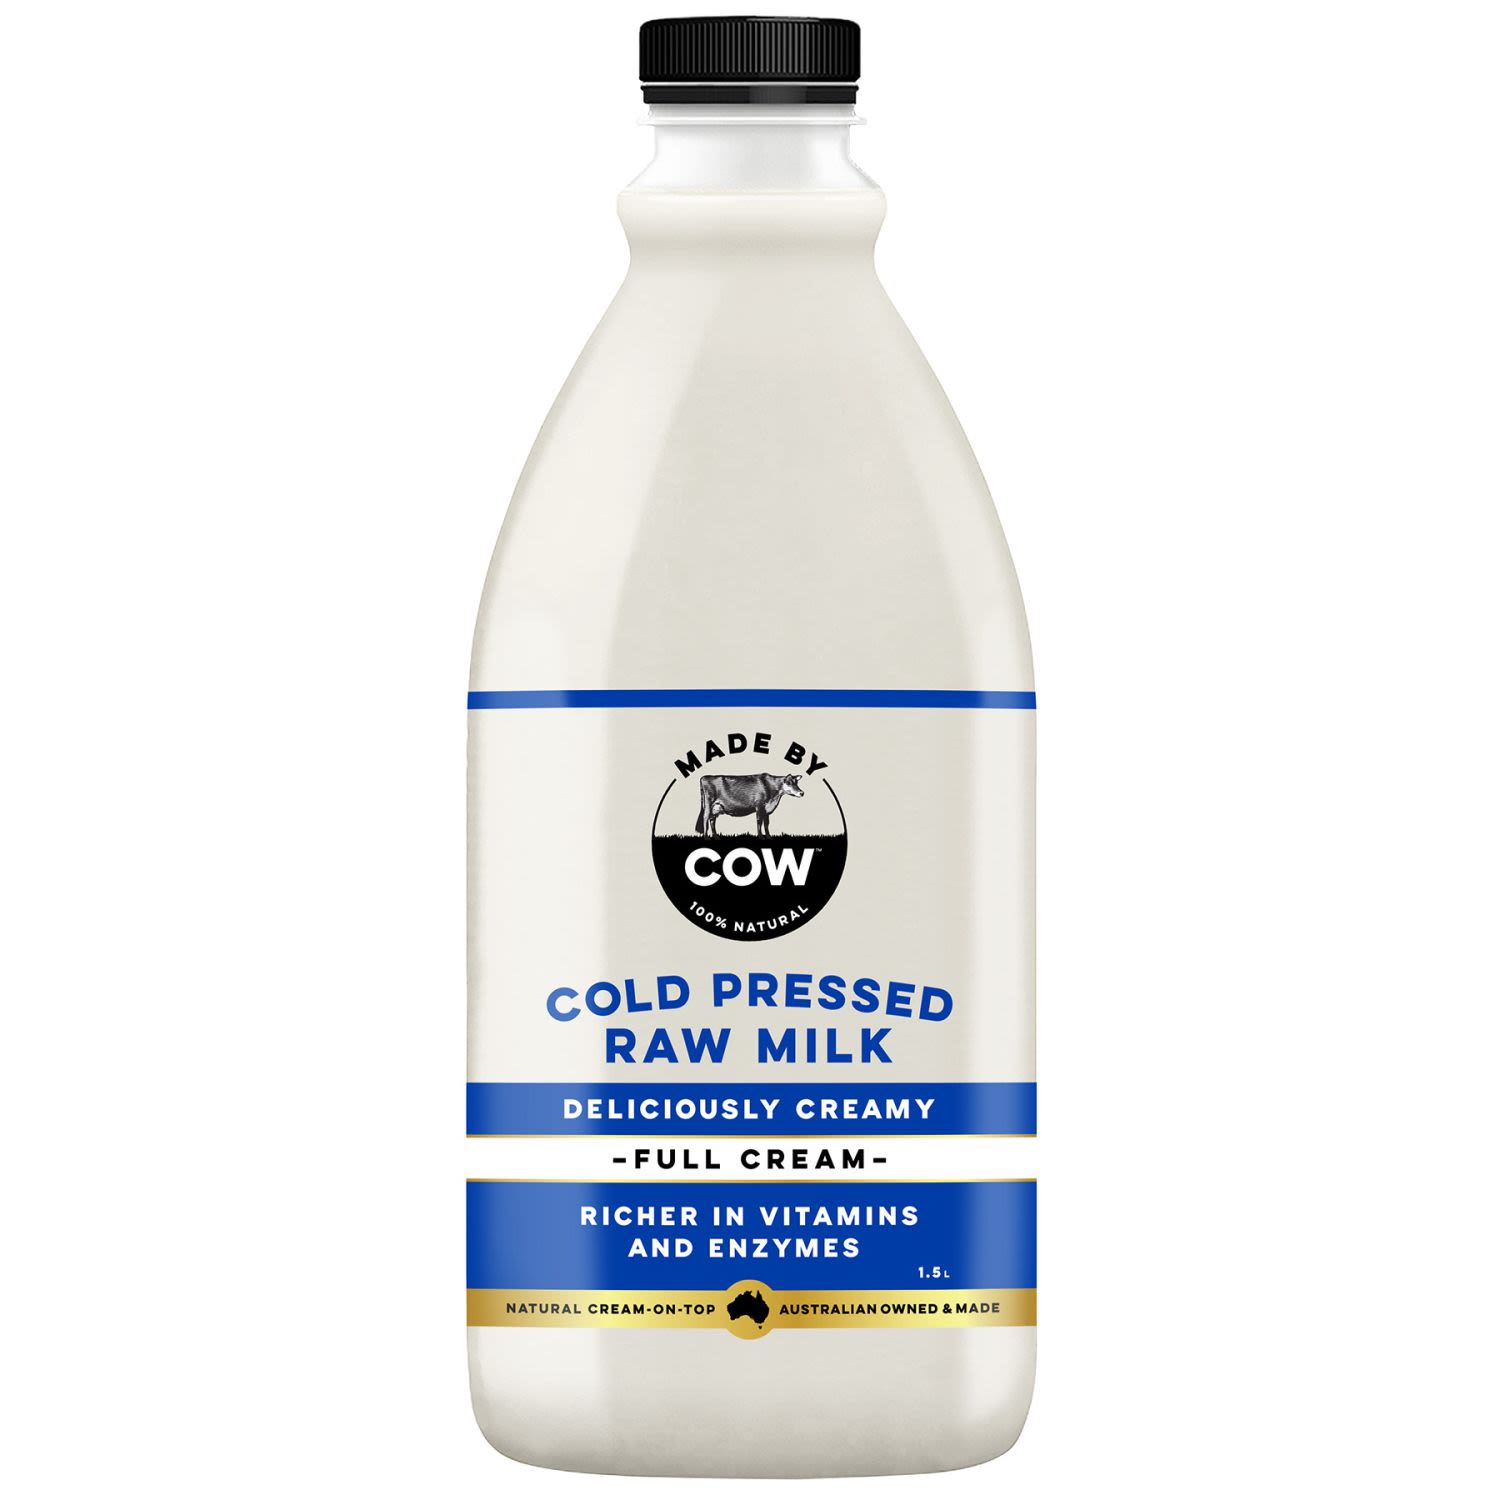 Made By Cows Cold Pressed Raw Milk, 1.5 Litre